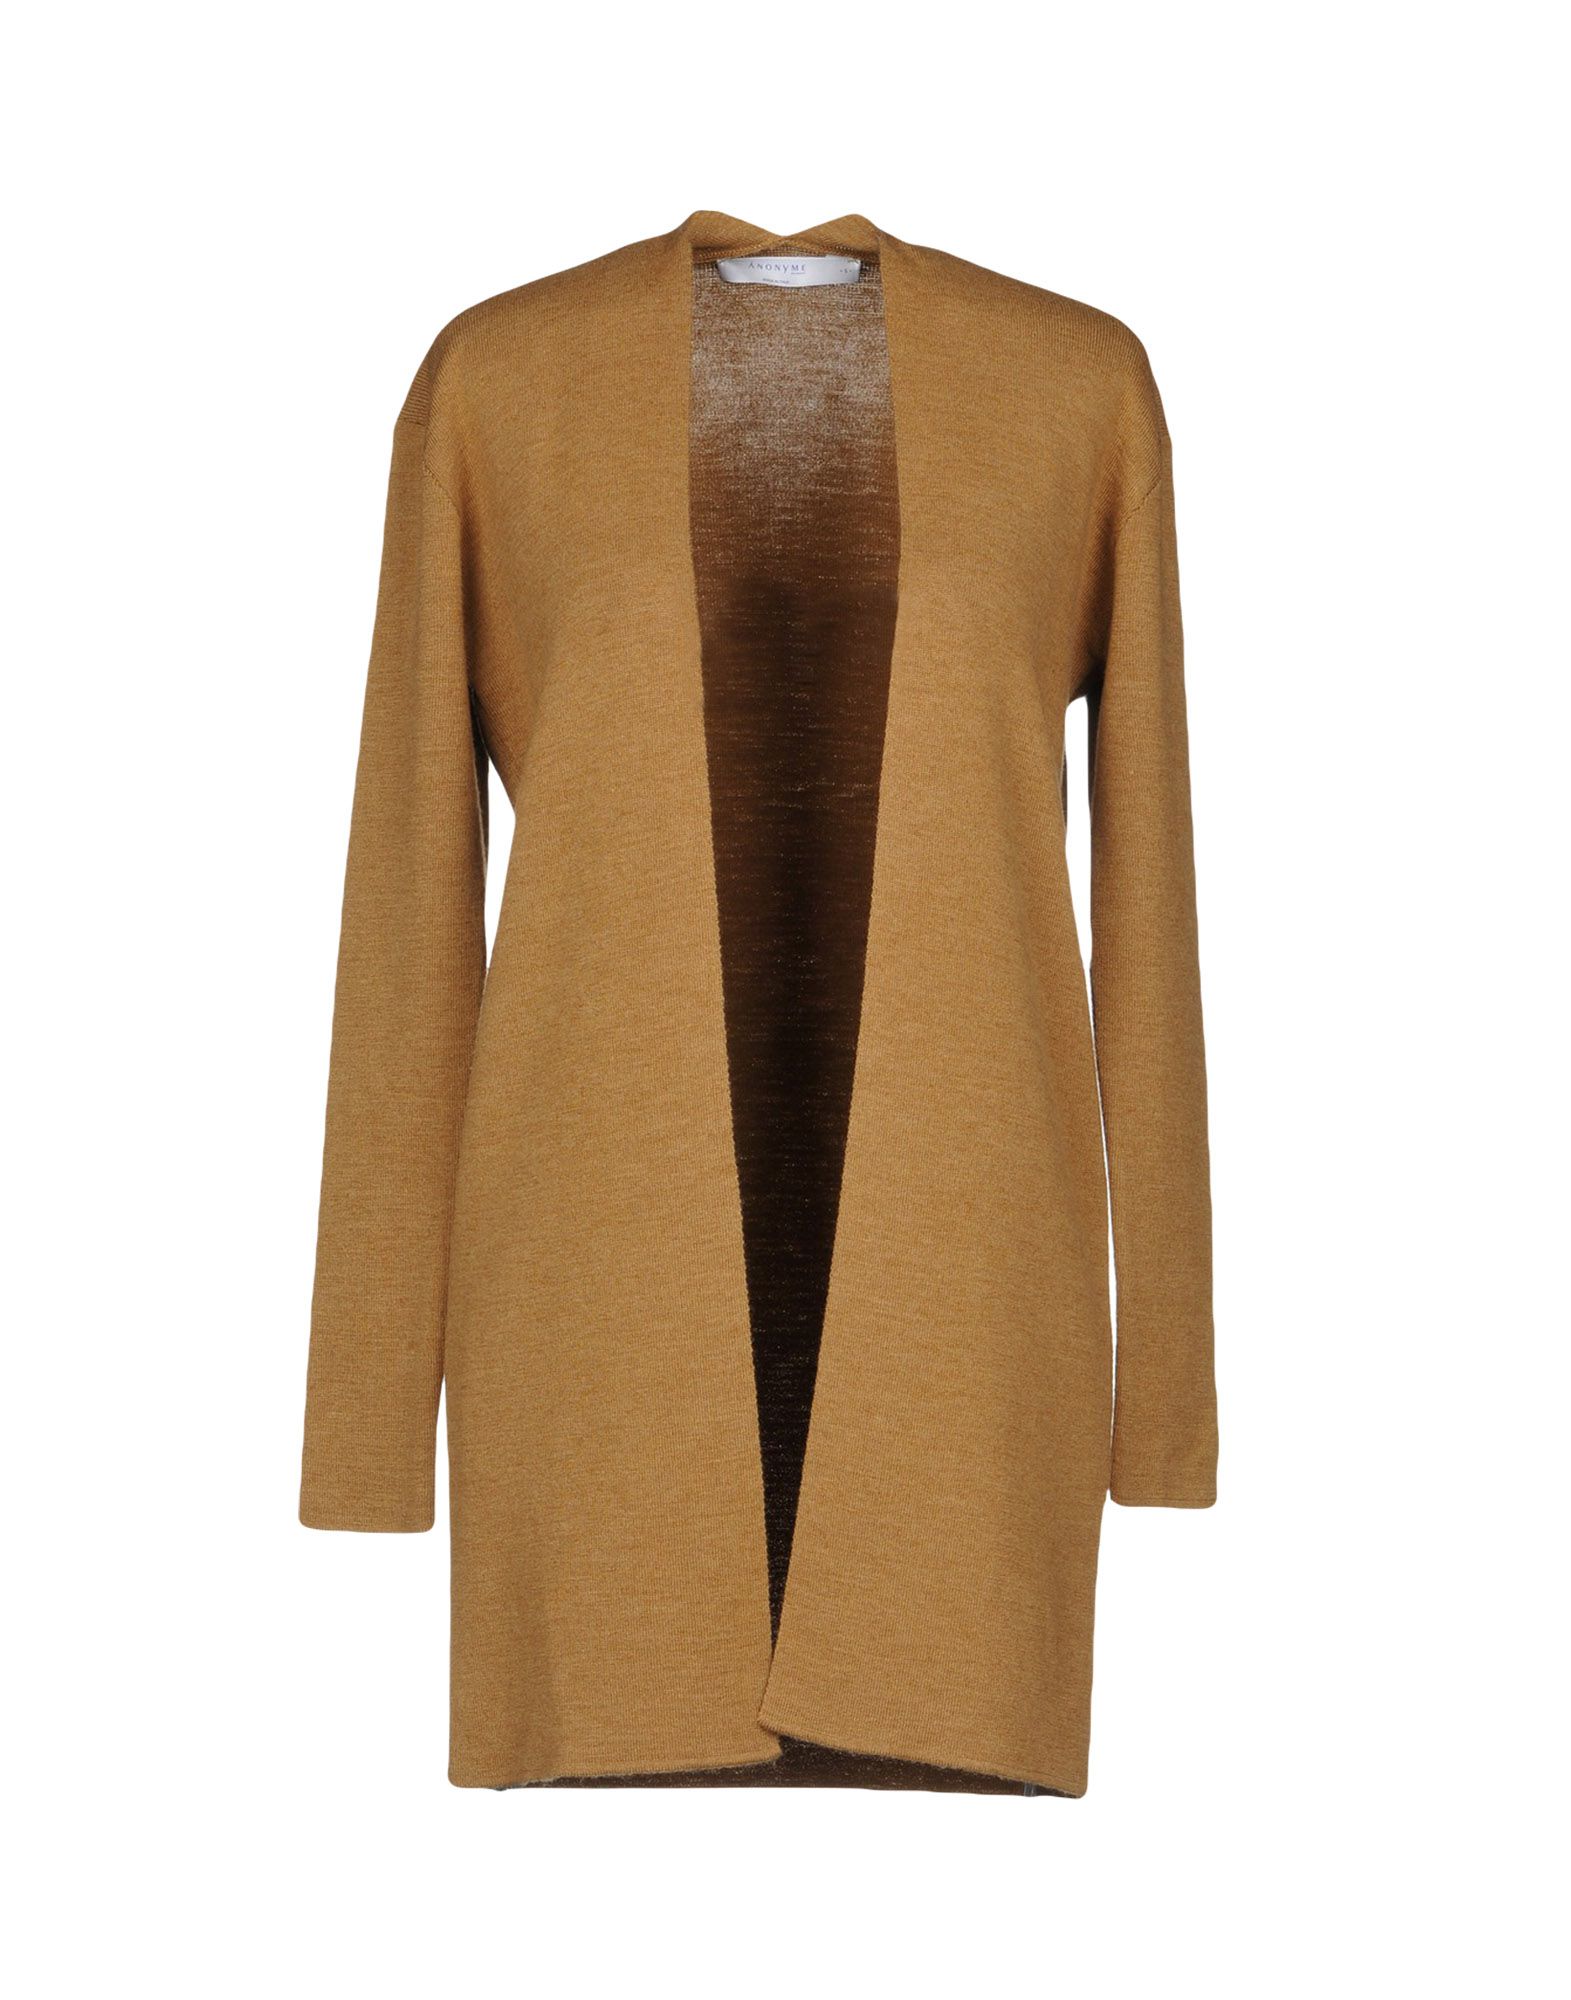 Anonyme Designers Cardigans In Camel